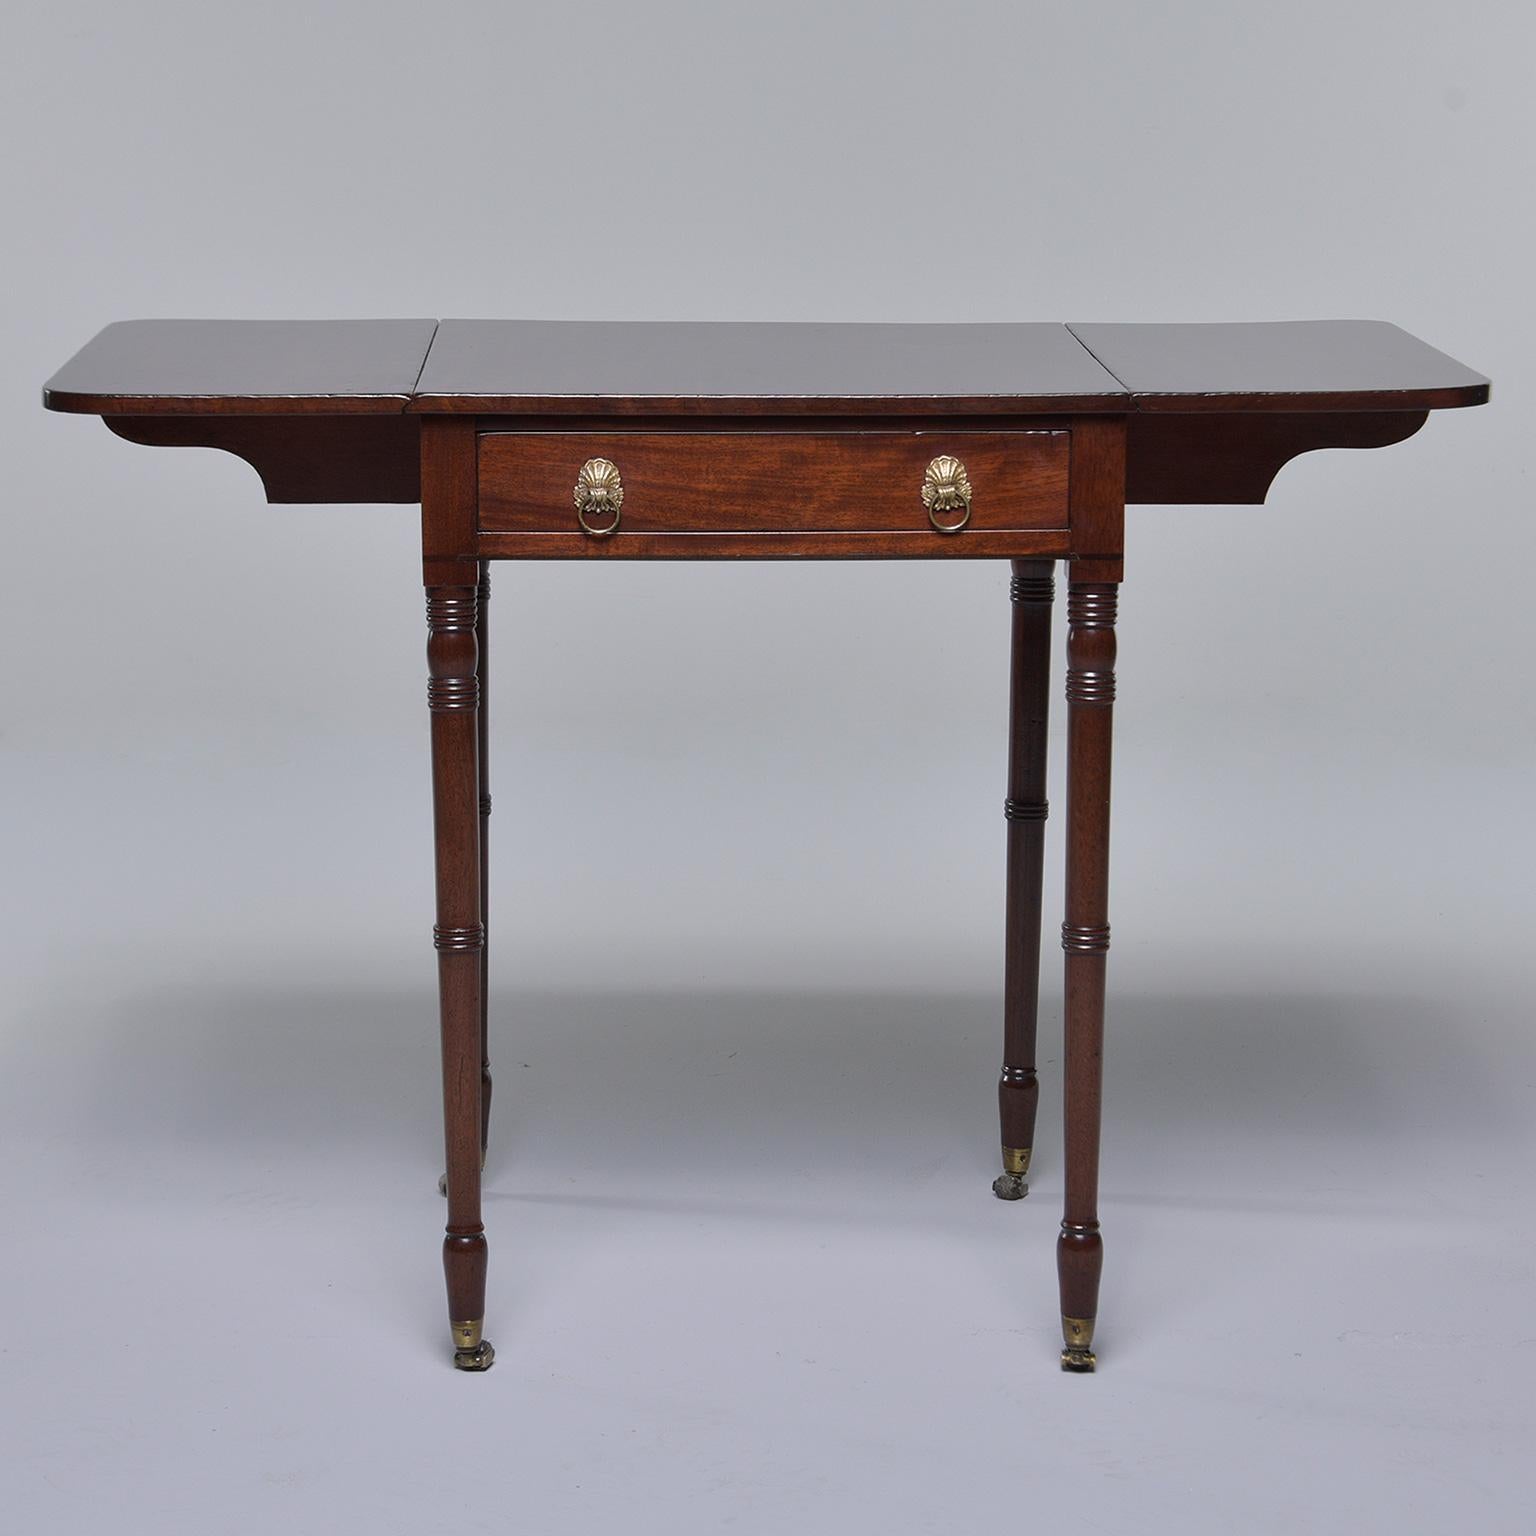 English Mahogany Pembroke Table with Original Brass Casters